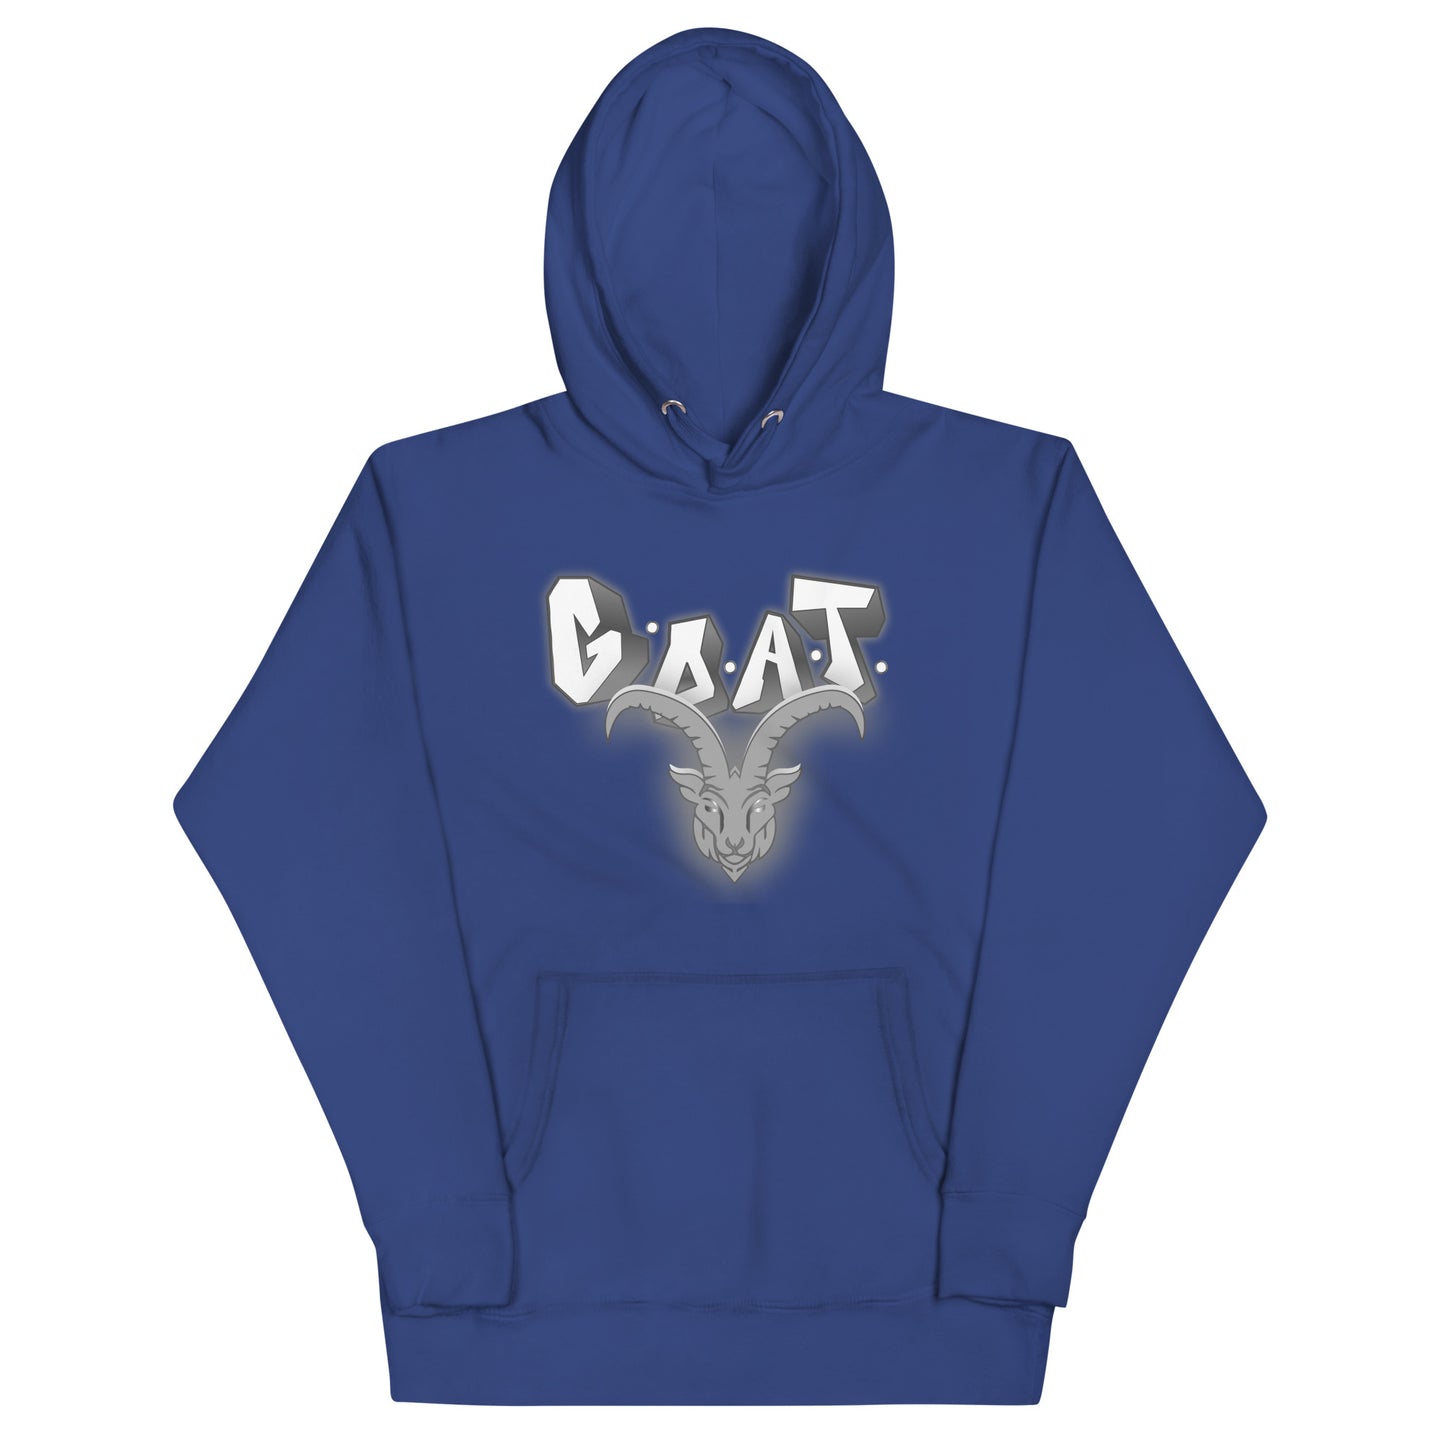 G.O.A.T. Grey Drip Hoodie (6 Colors)